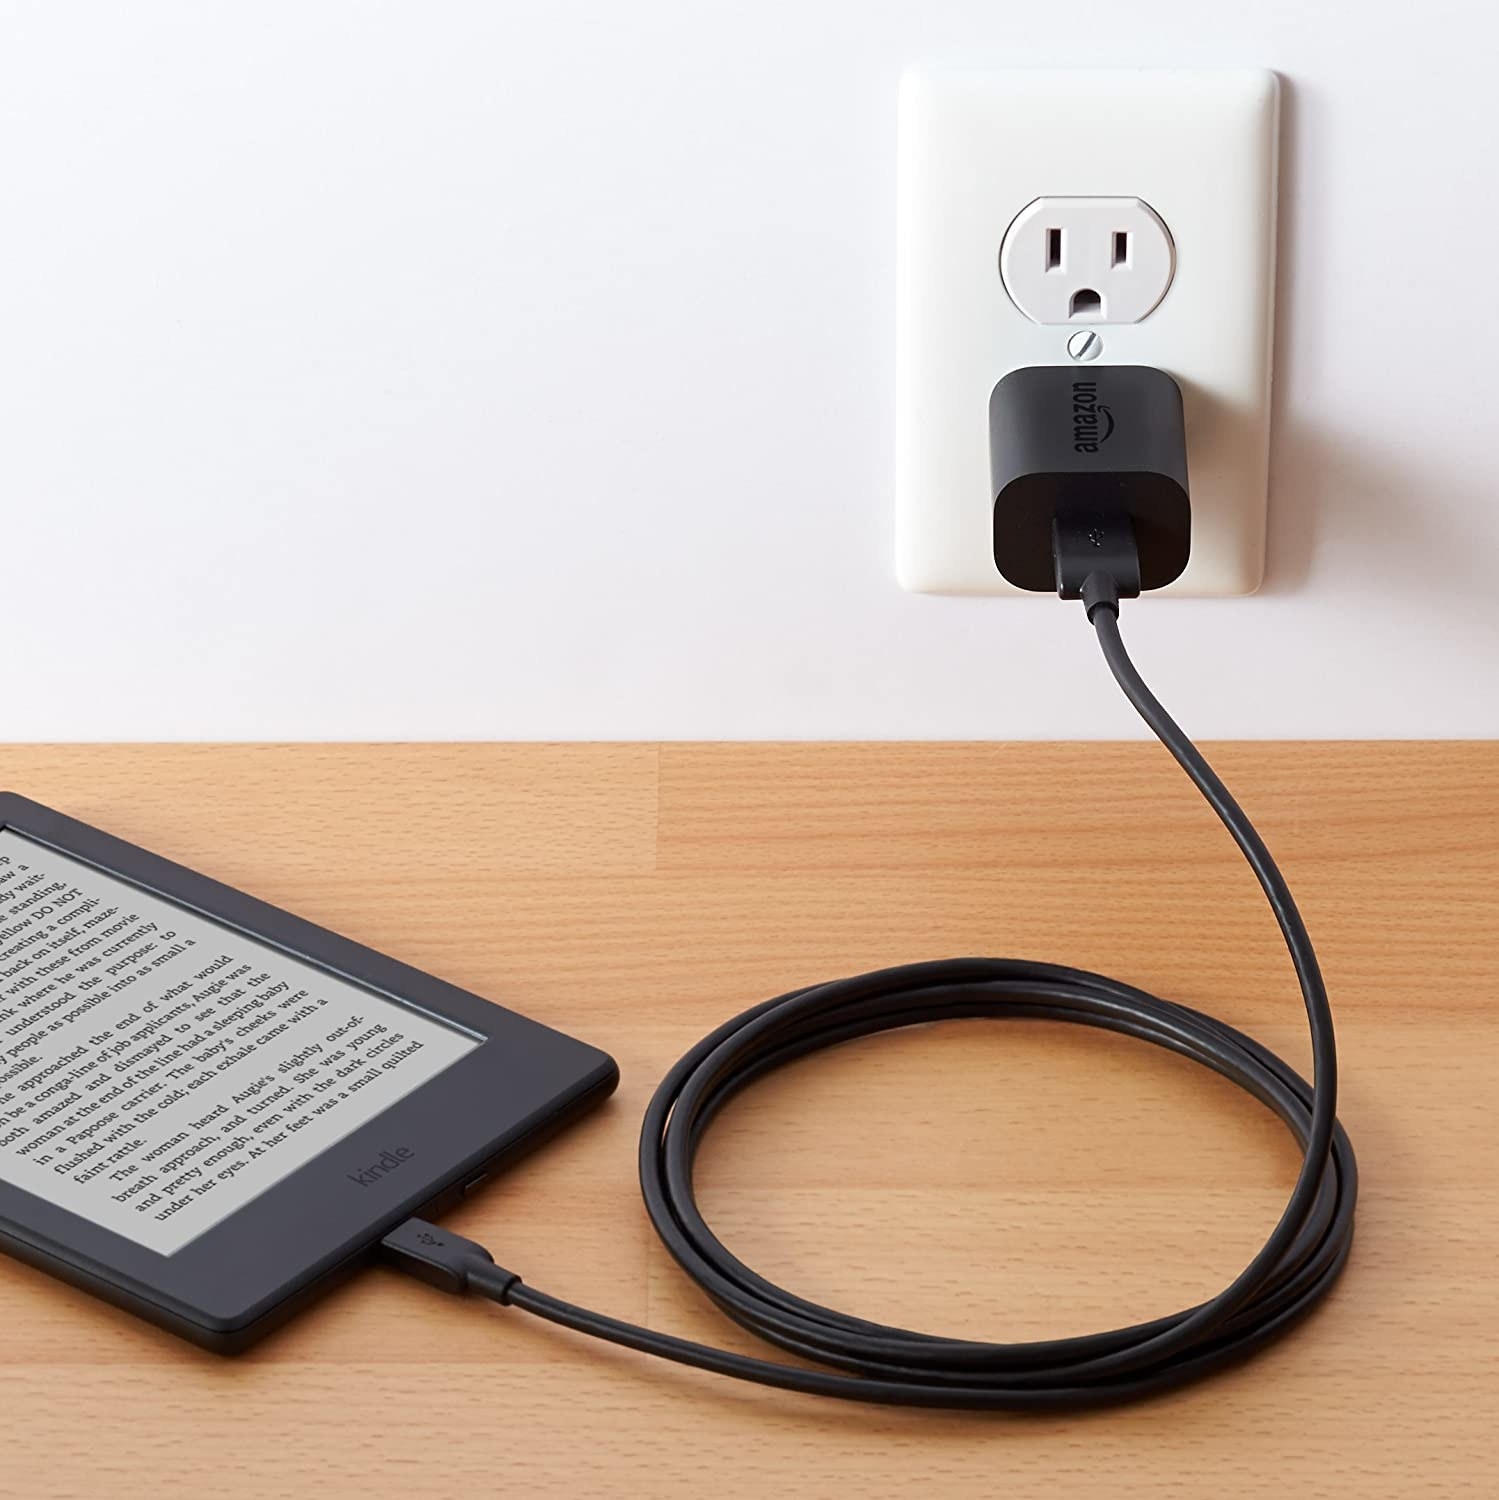 A charging cable charging a Kindle